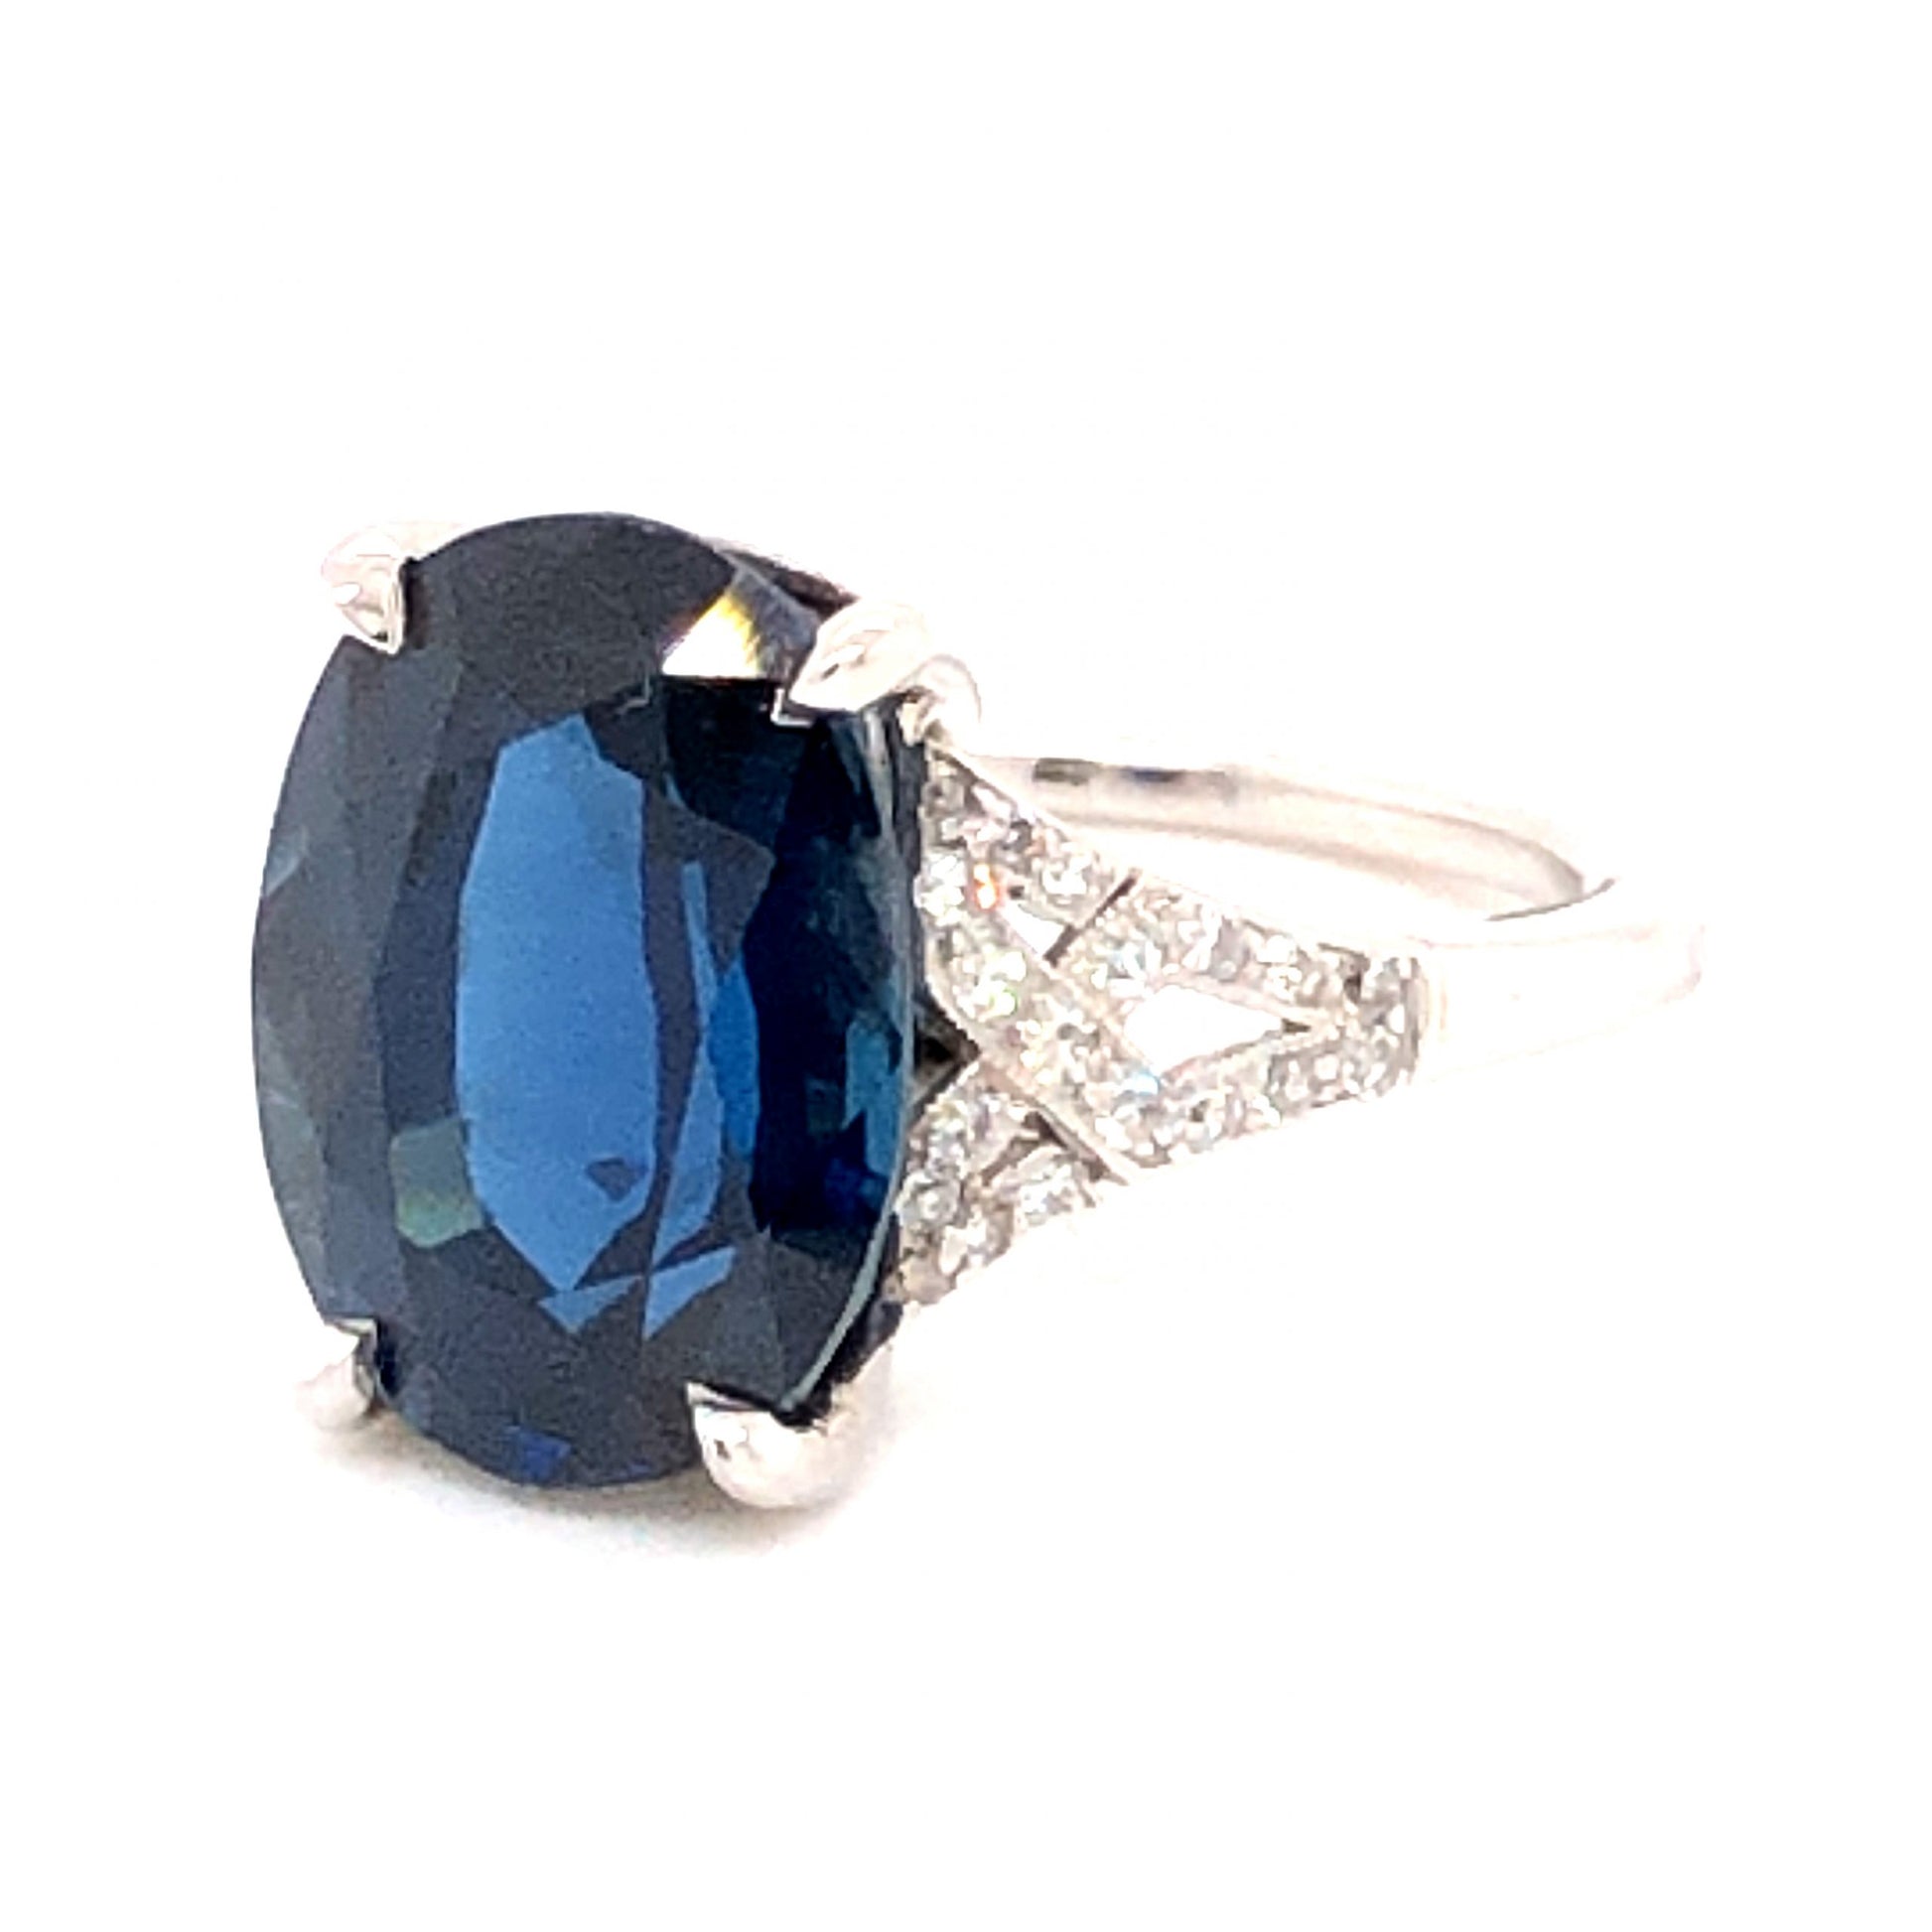 Vintage 6.90 Oval Cut Sapphire w/ Diamonds in PlatinumComposition: Platinum Ring Size: 4.75 Total Diamond Weight: .38ct Total Gram Weight: 5.5 g